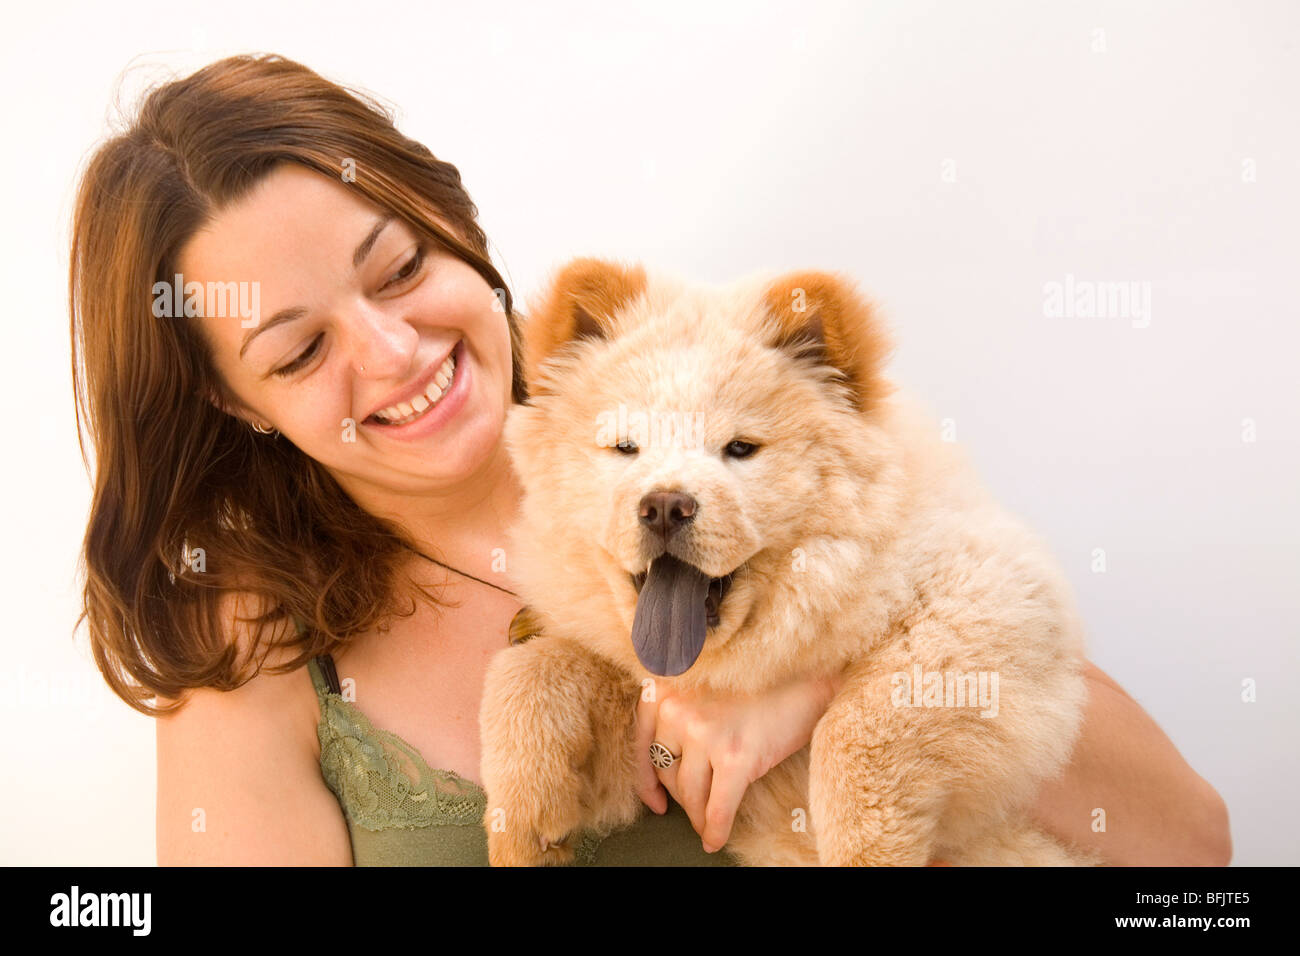 A young Caucasian woman smiles as she holds her 8-week-old chow chow puppy. Stock Photo